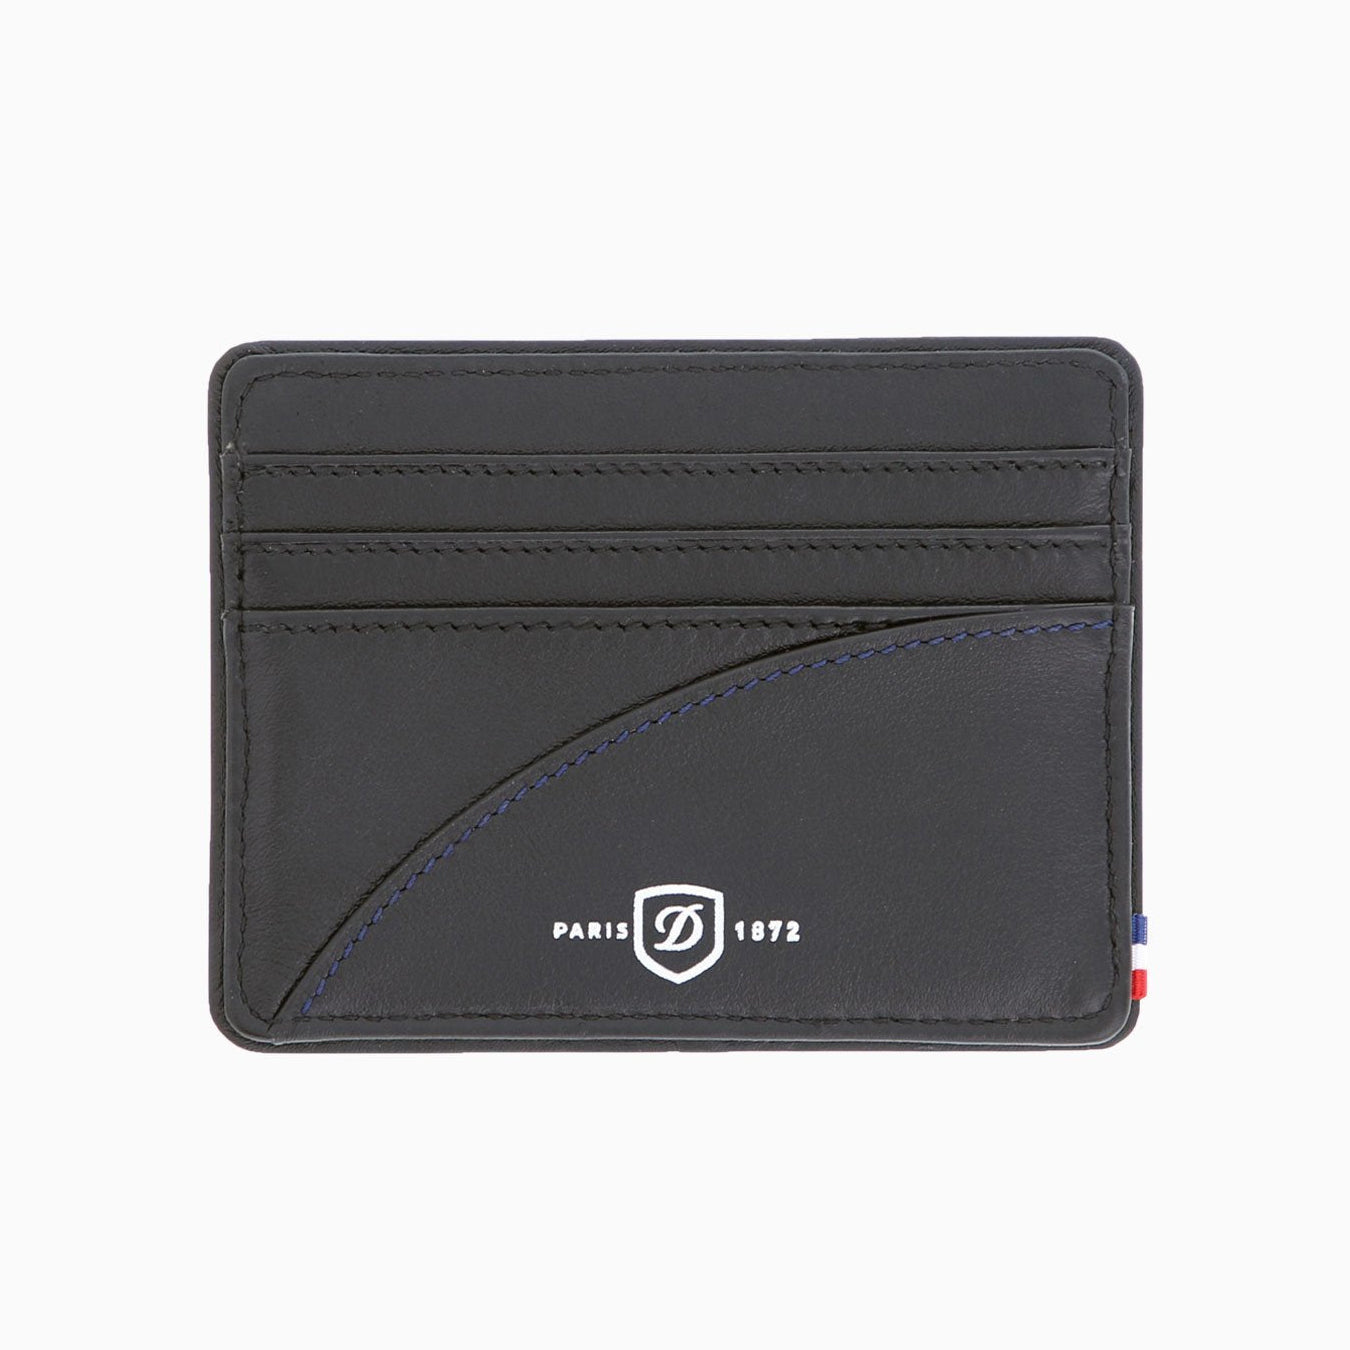 Habanos Specialist Vietnam ACCESSORIES [style_3597390255853] Ví da đựng thẻ hiệu S.T.Dupont (LEATHER CREDIT CARD HOLDER style no 172004).